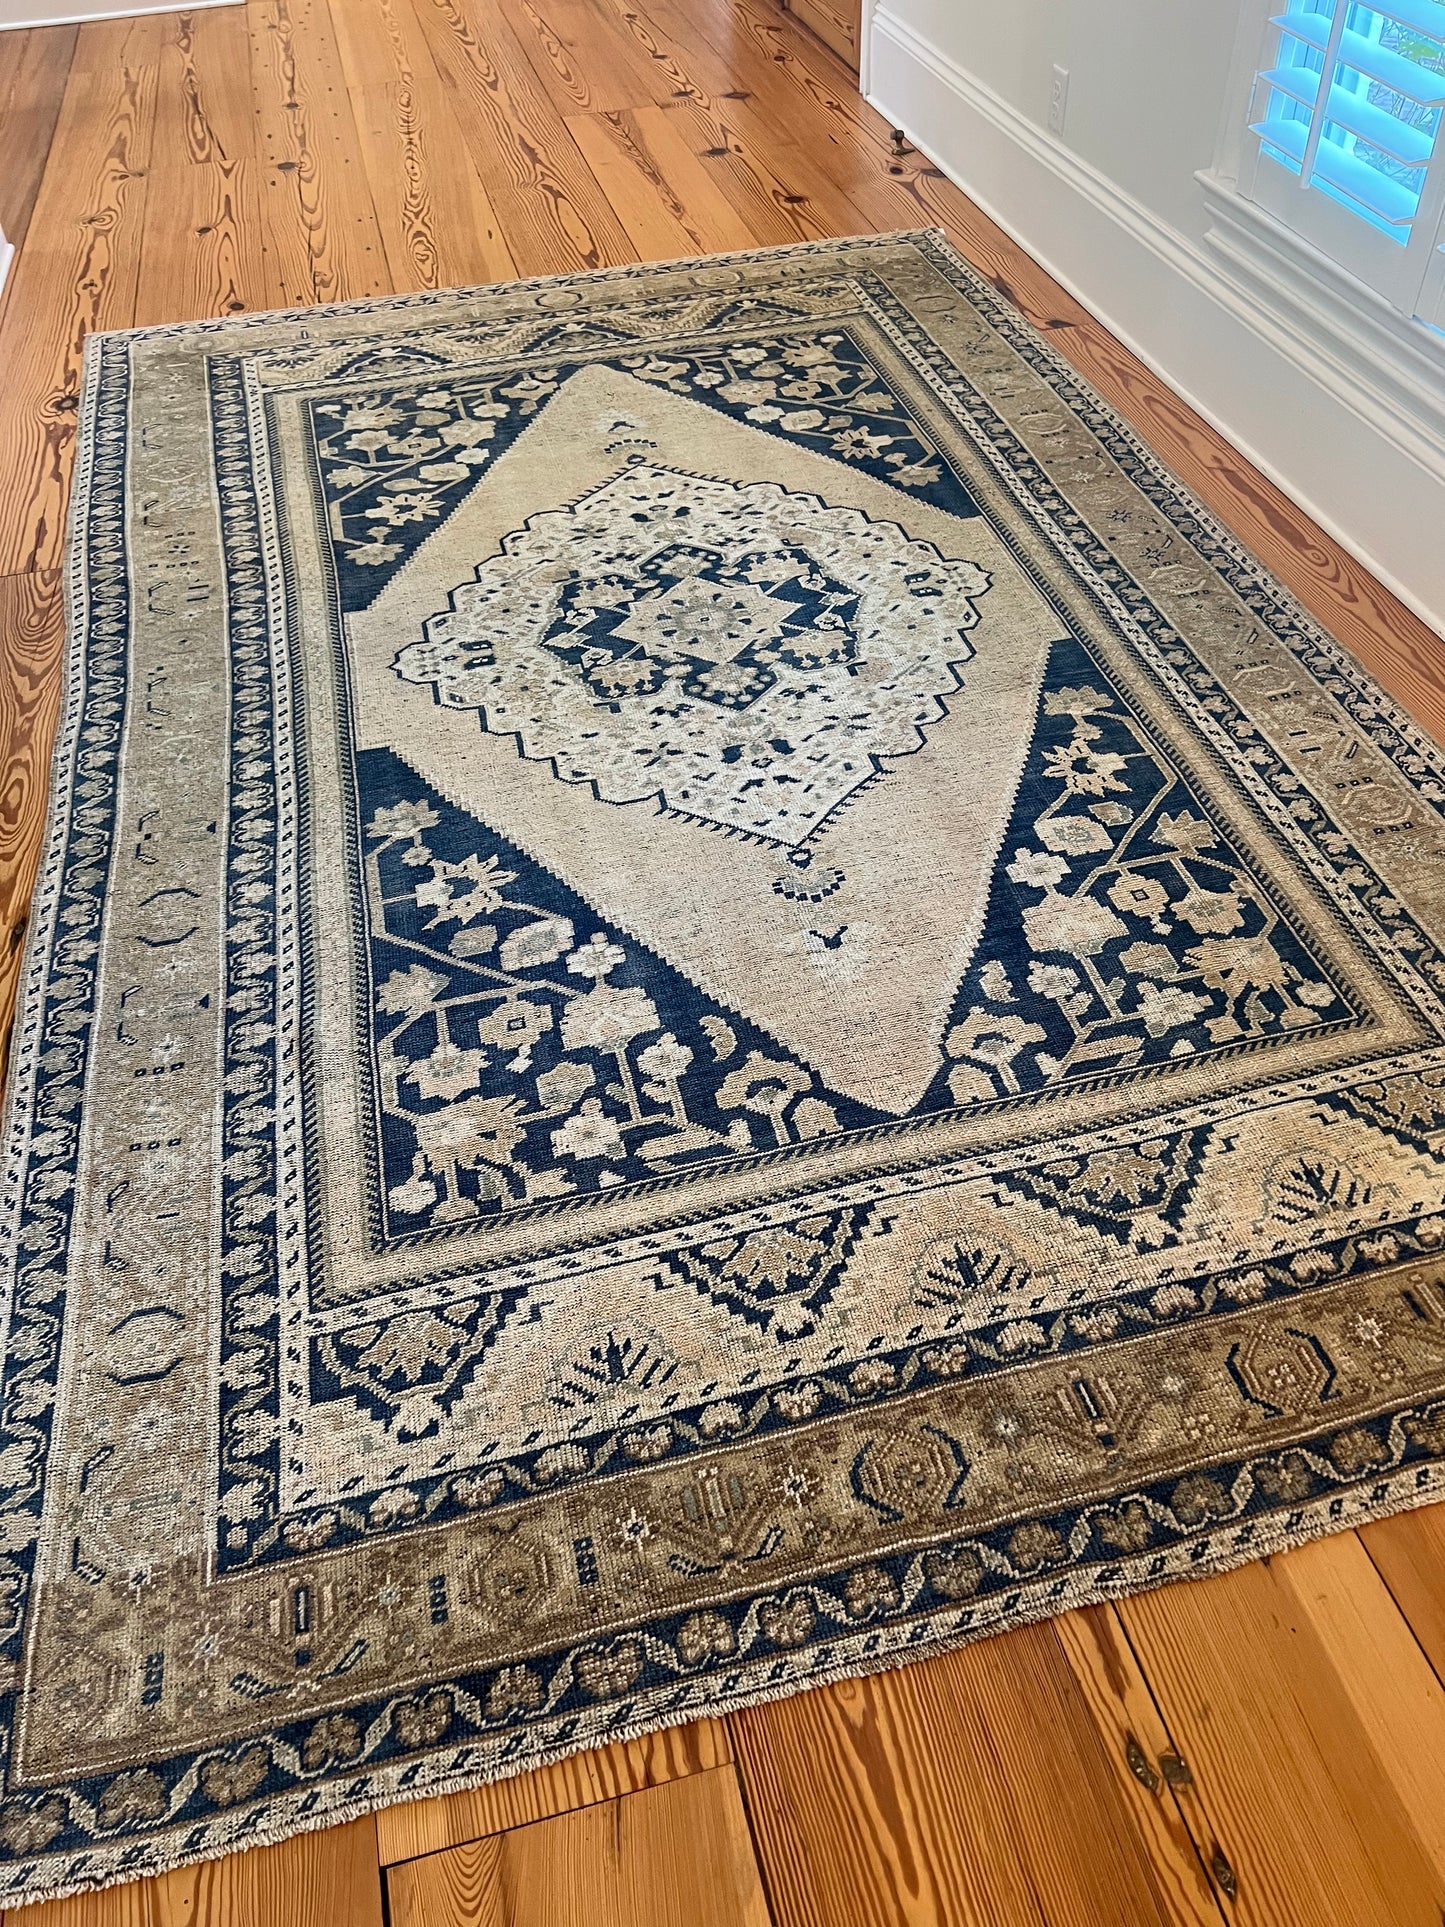 6'4" x 10'1" Large Area Rug with Navy